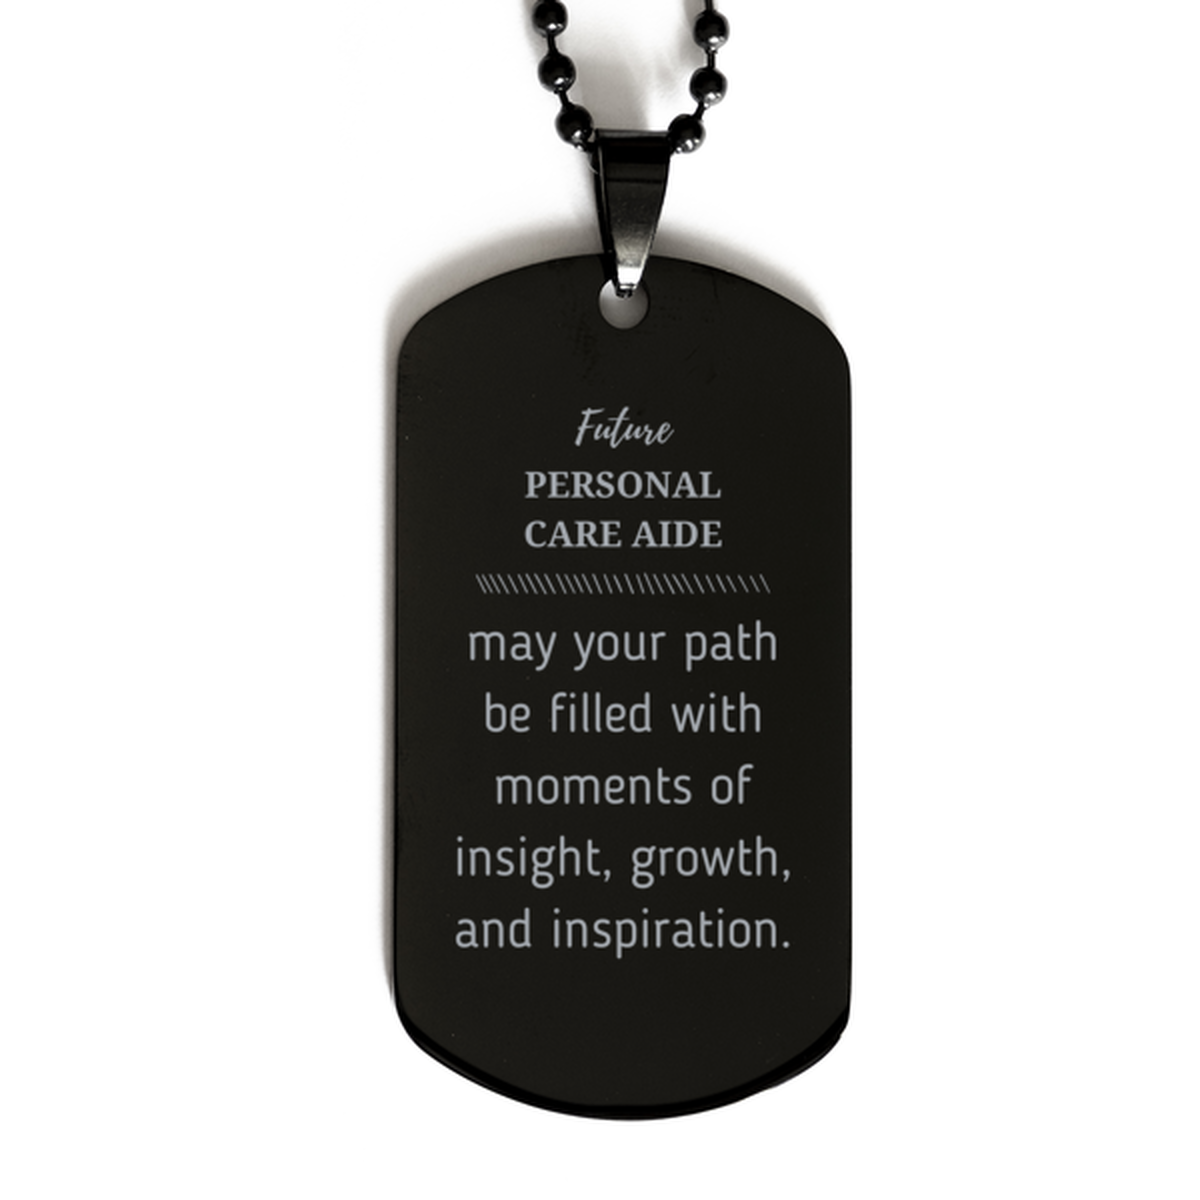 Future Personal Care Aide Gifts, May your path be filled with moments of insight, Graduation Gifts for New Personal Care Aide, Christmas Unique Black Dog Tag For Men, Women, Friends